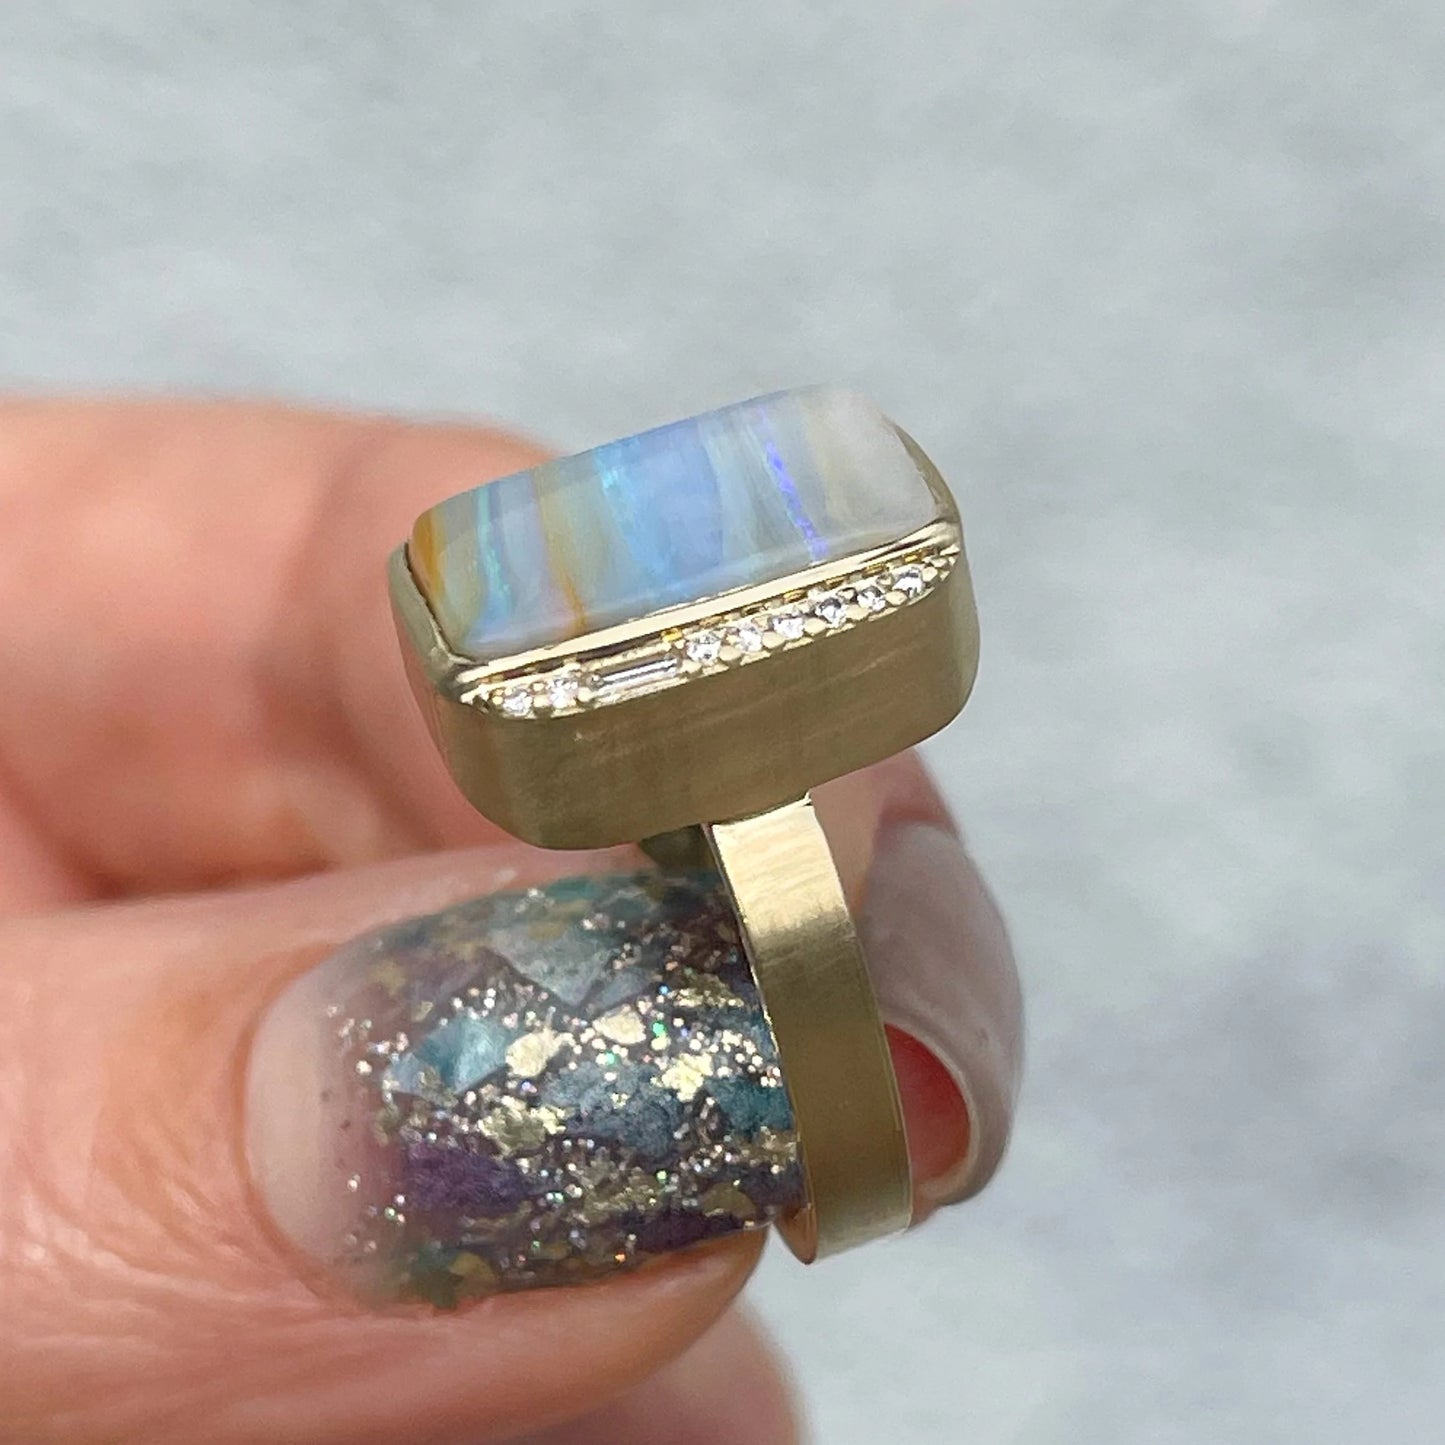 An Australian Opal Ring by NIXIN Jewelry with a striped opal is held to show its diamond border.